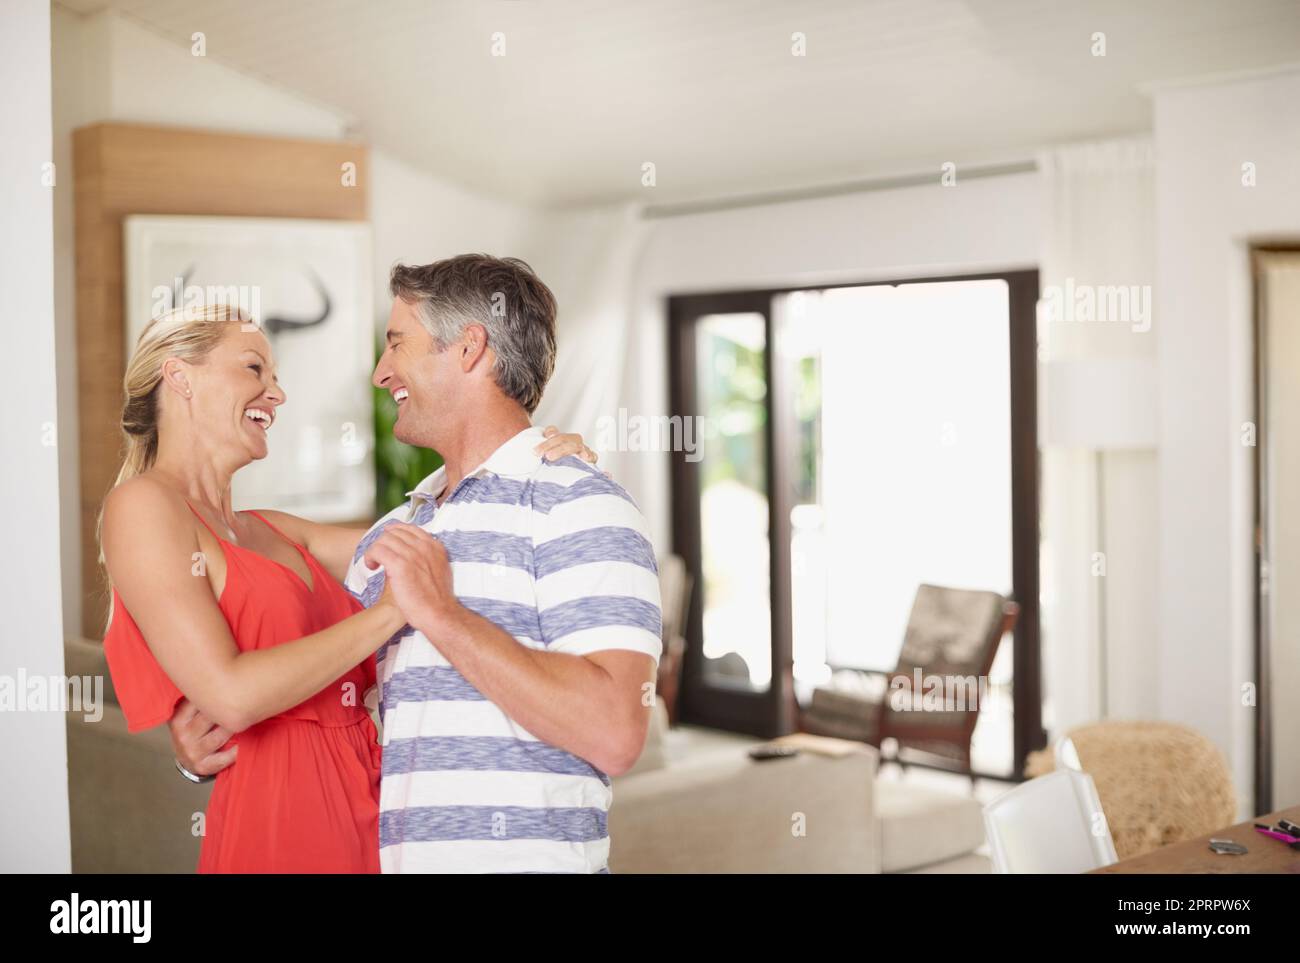 Keeping the romance alive. a happily married couple dancing together at home. Stock Photo